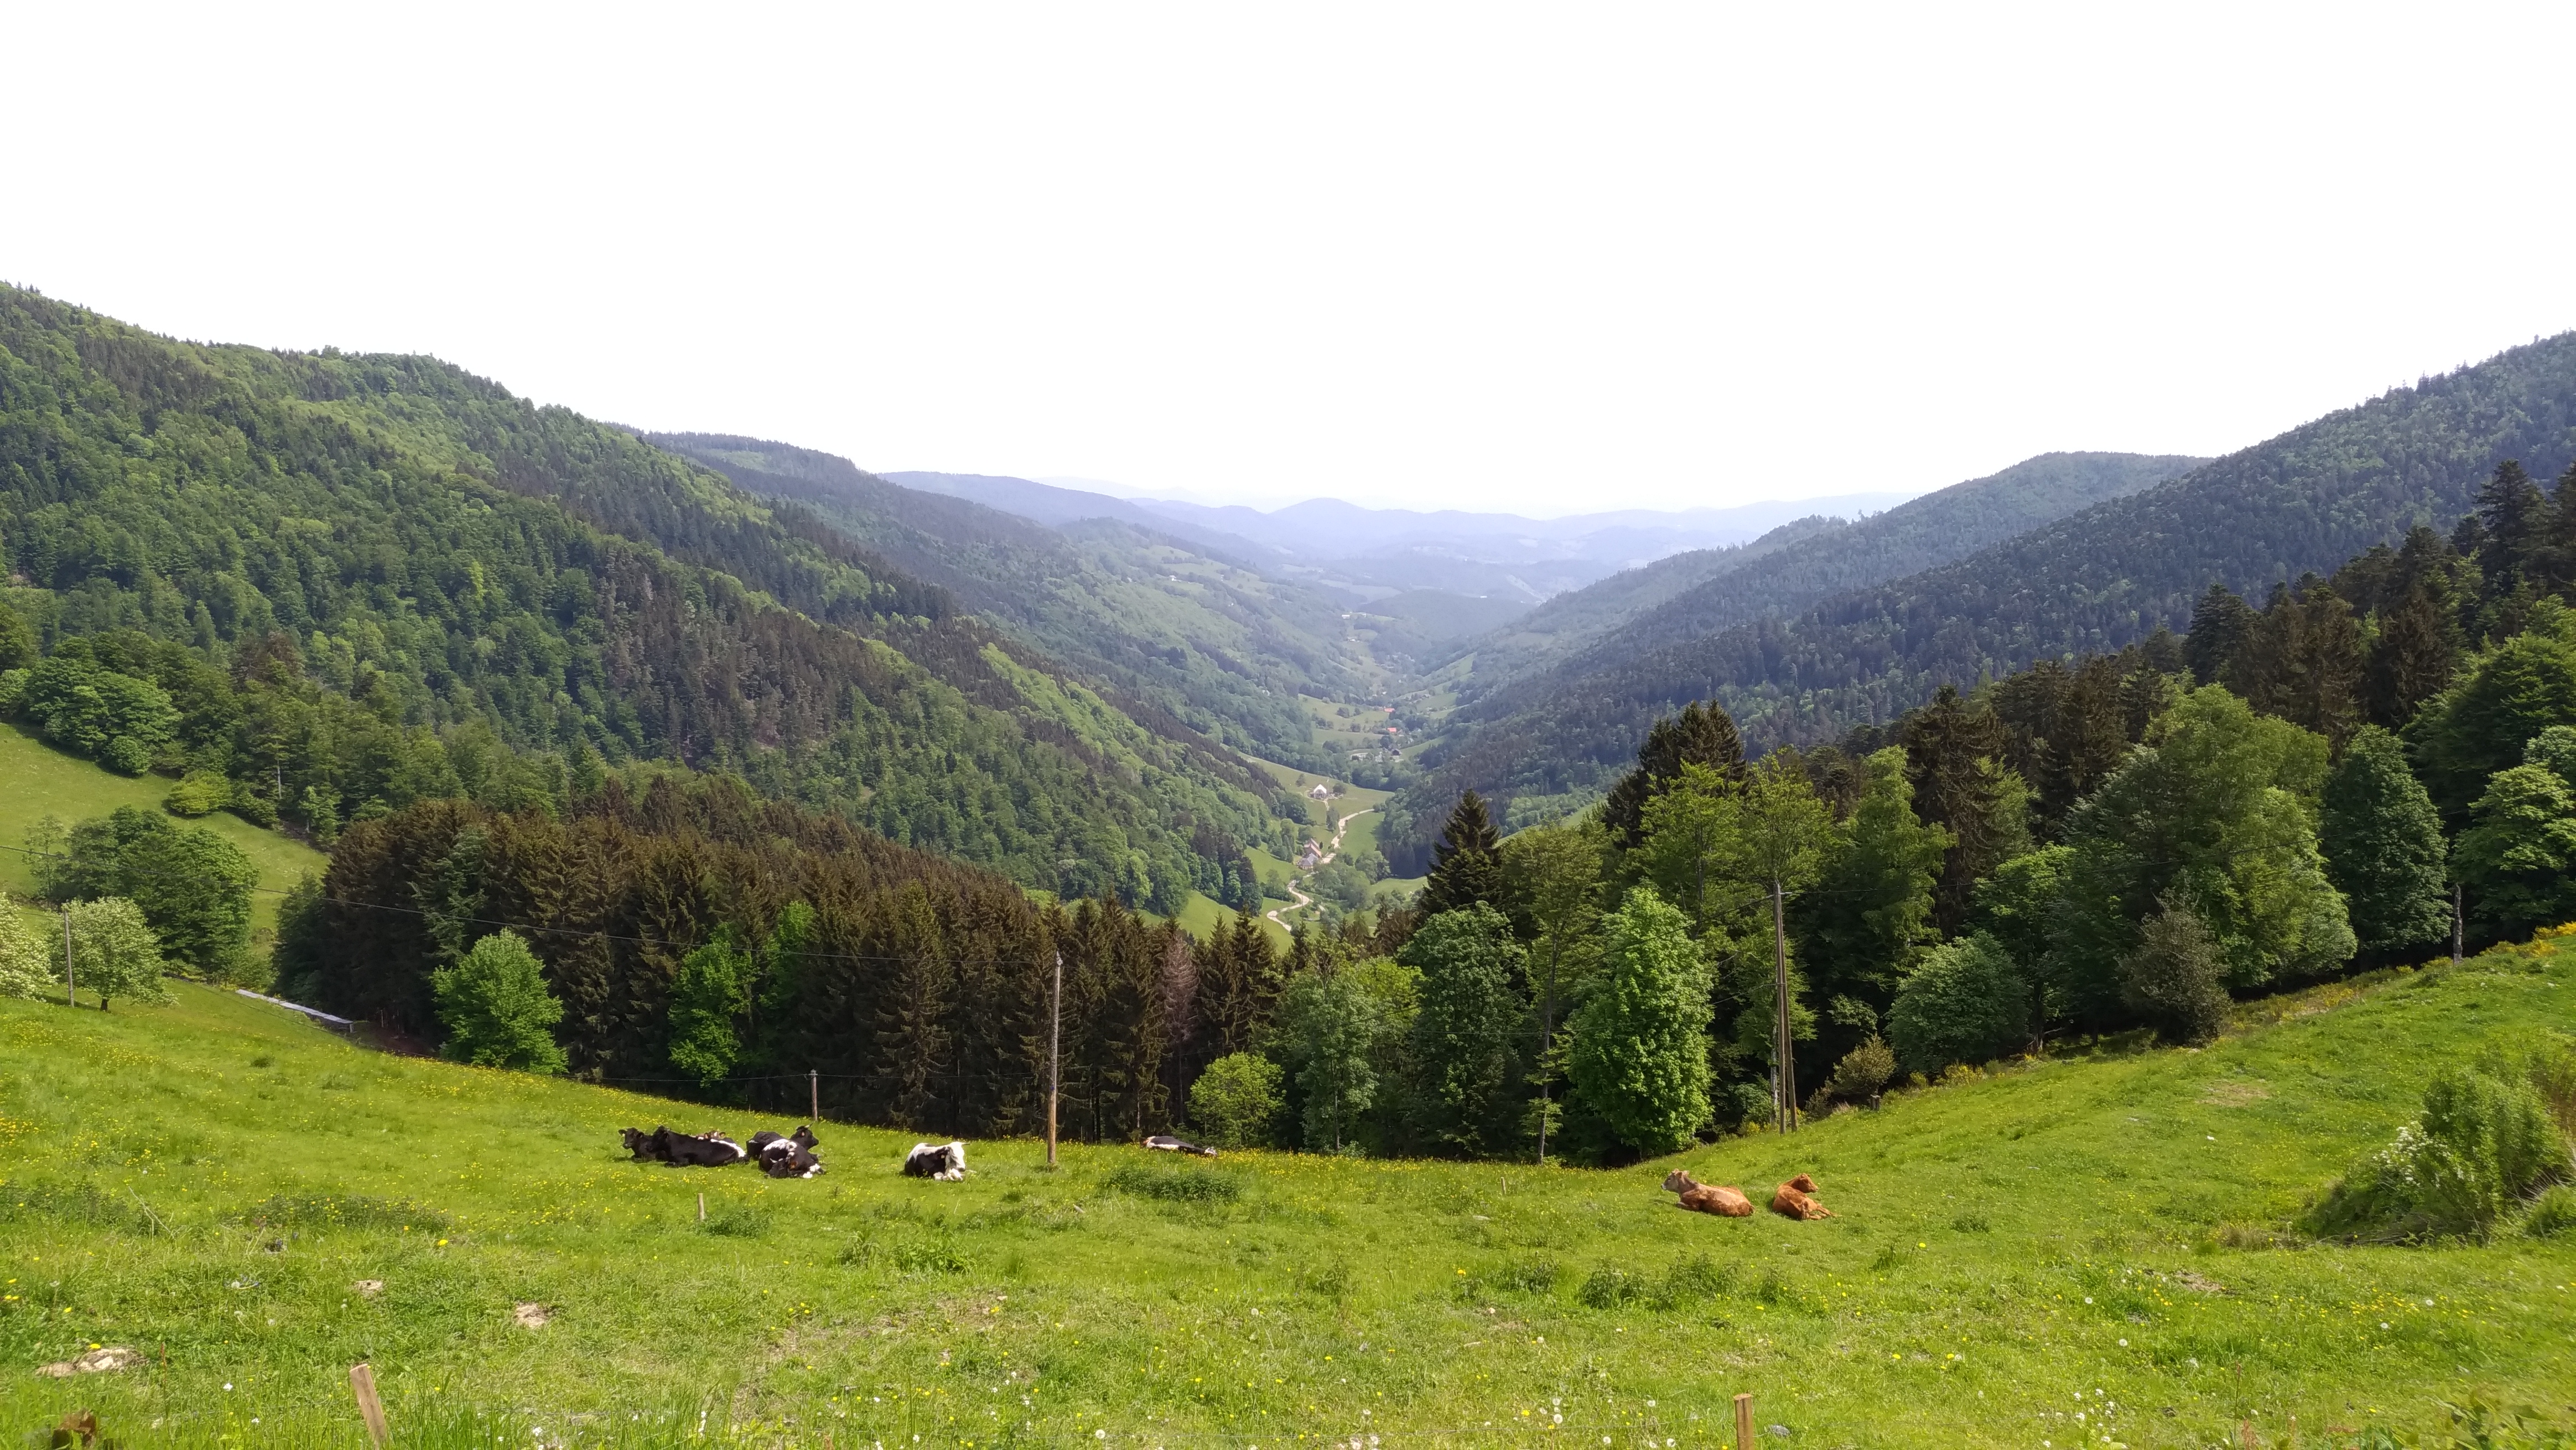 Cows relaxing in the valley